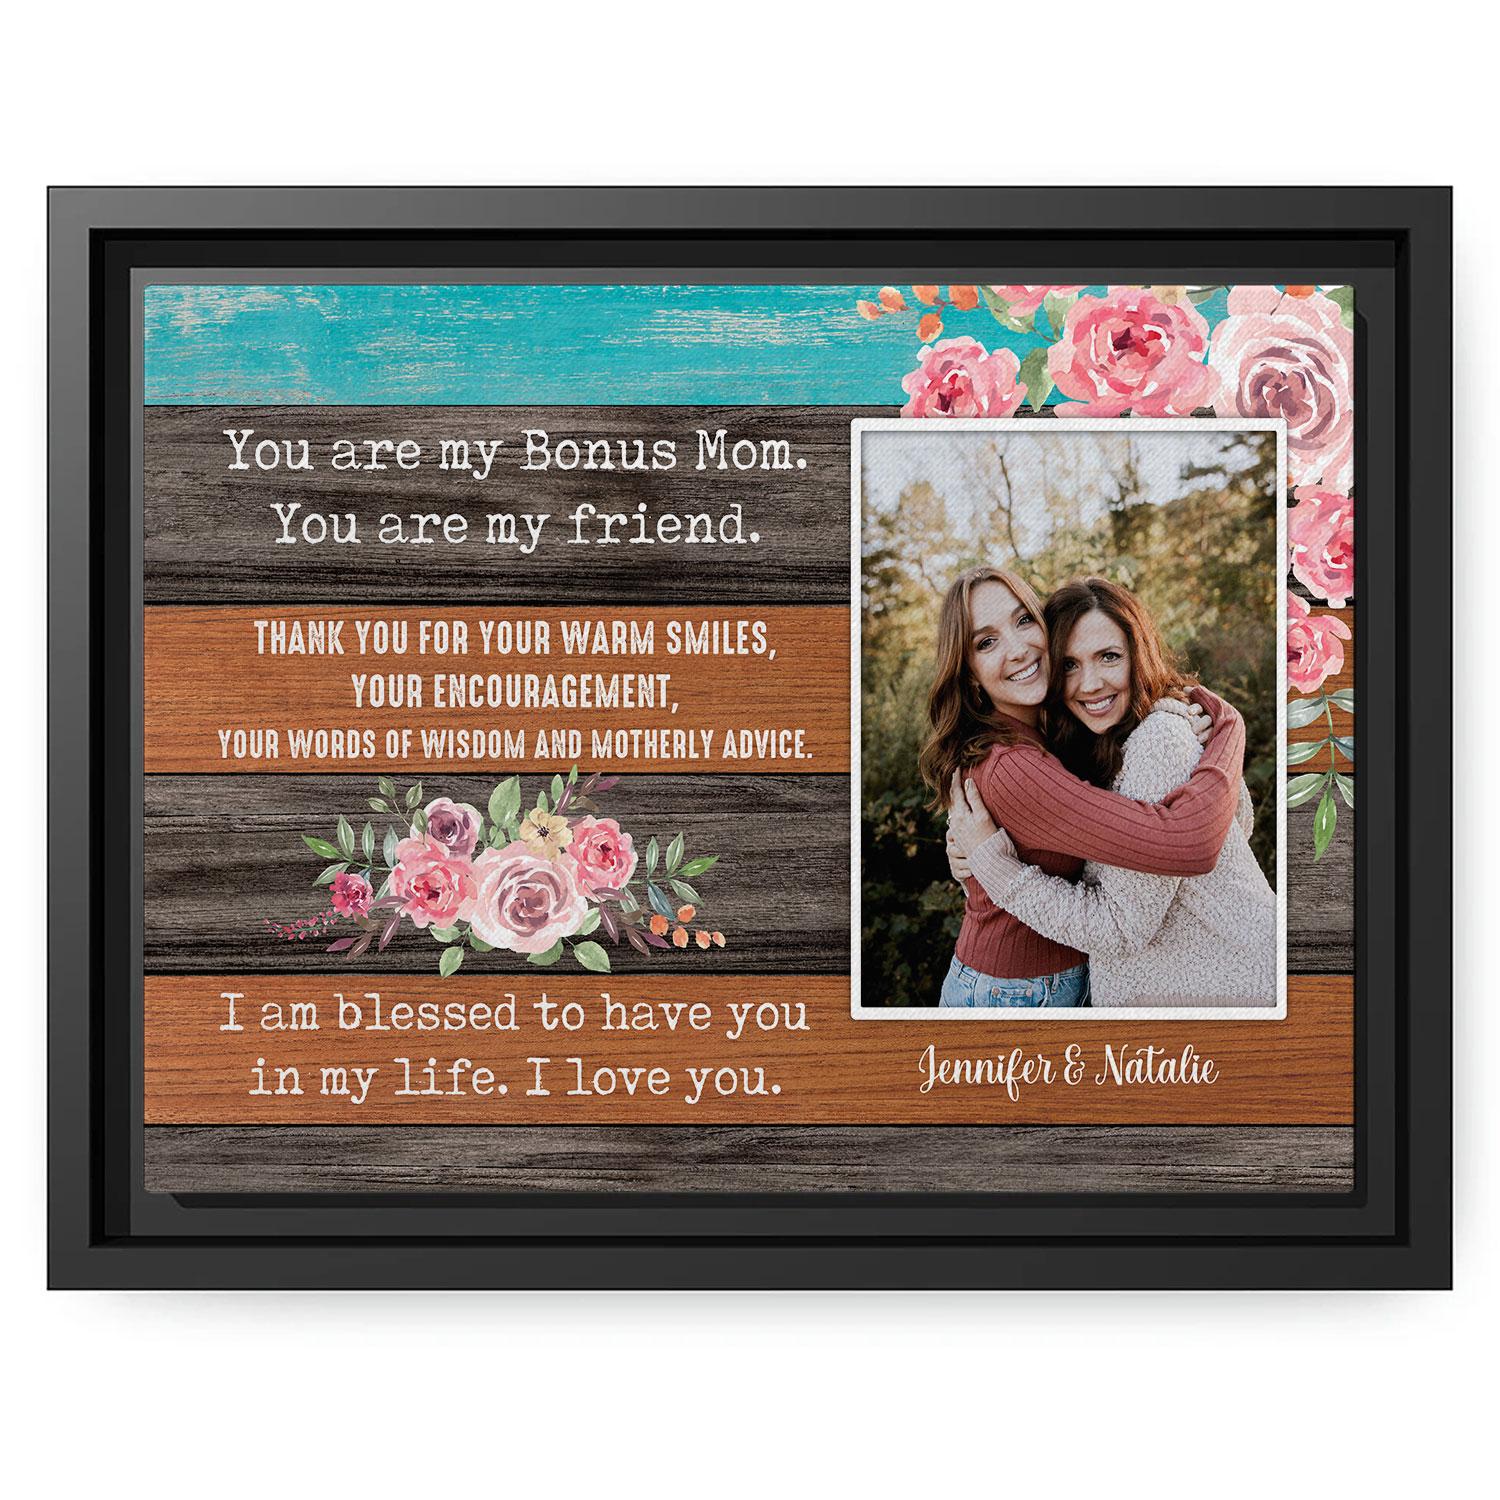 I Am Blessed To Have You In My Life - Personalized  gift For Bonus Mom - Custom Canvas Print - MyMindfulGifts